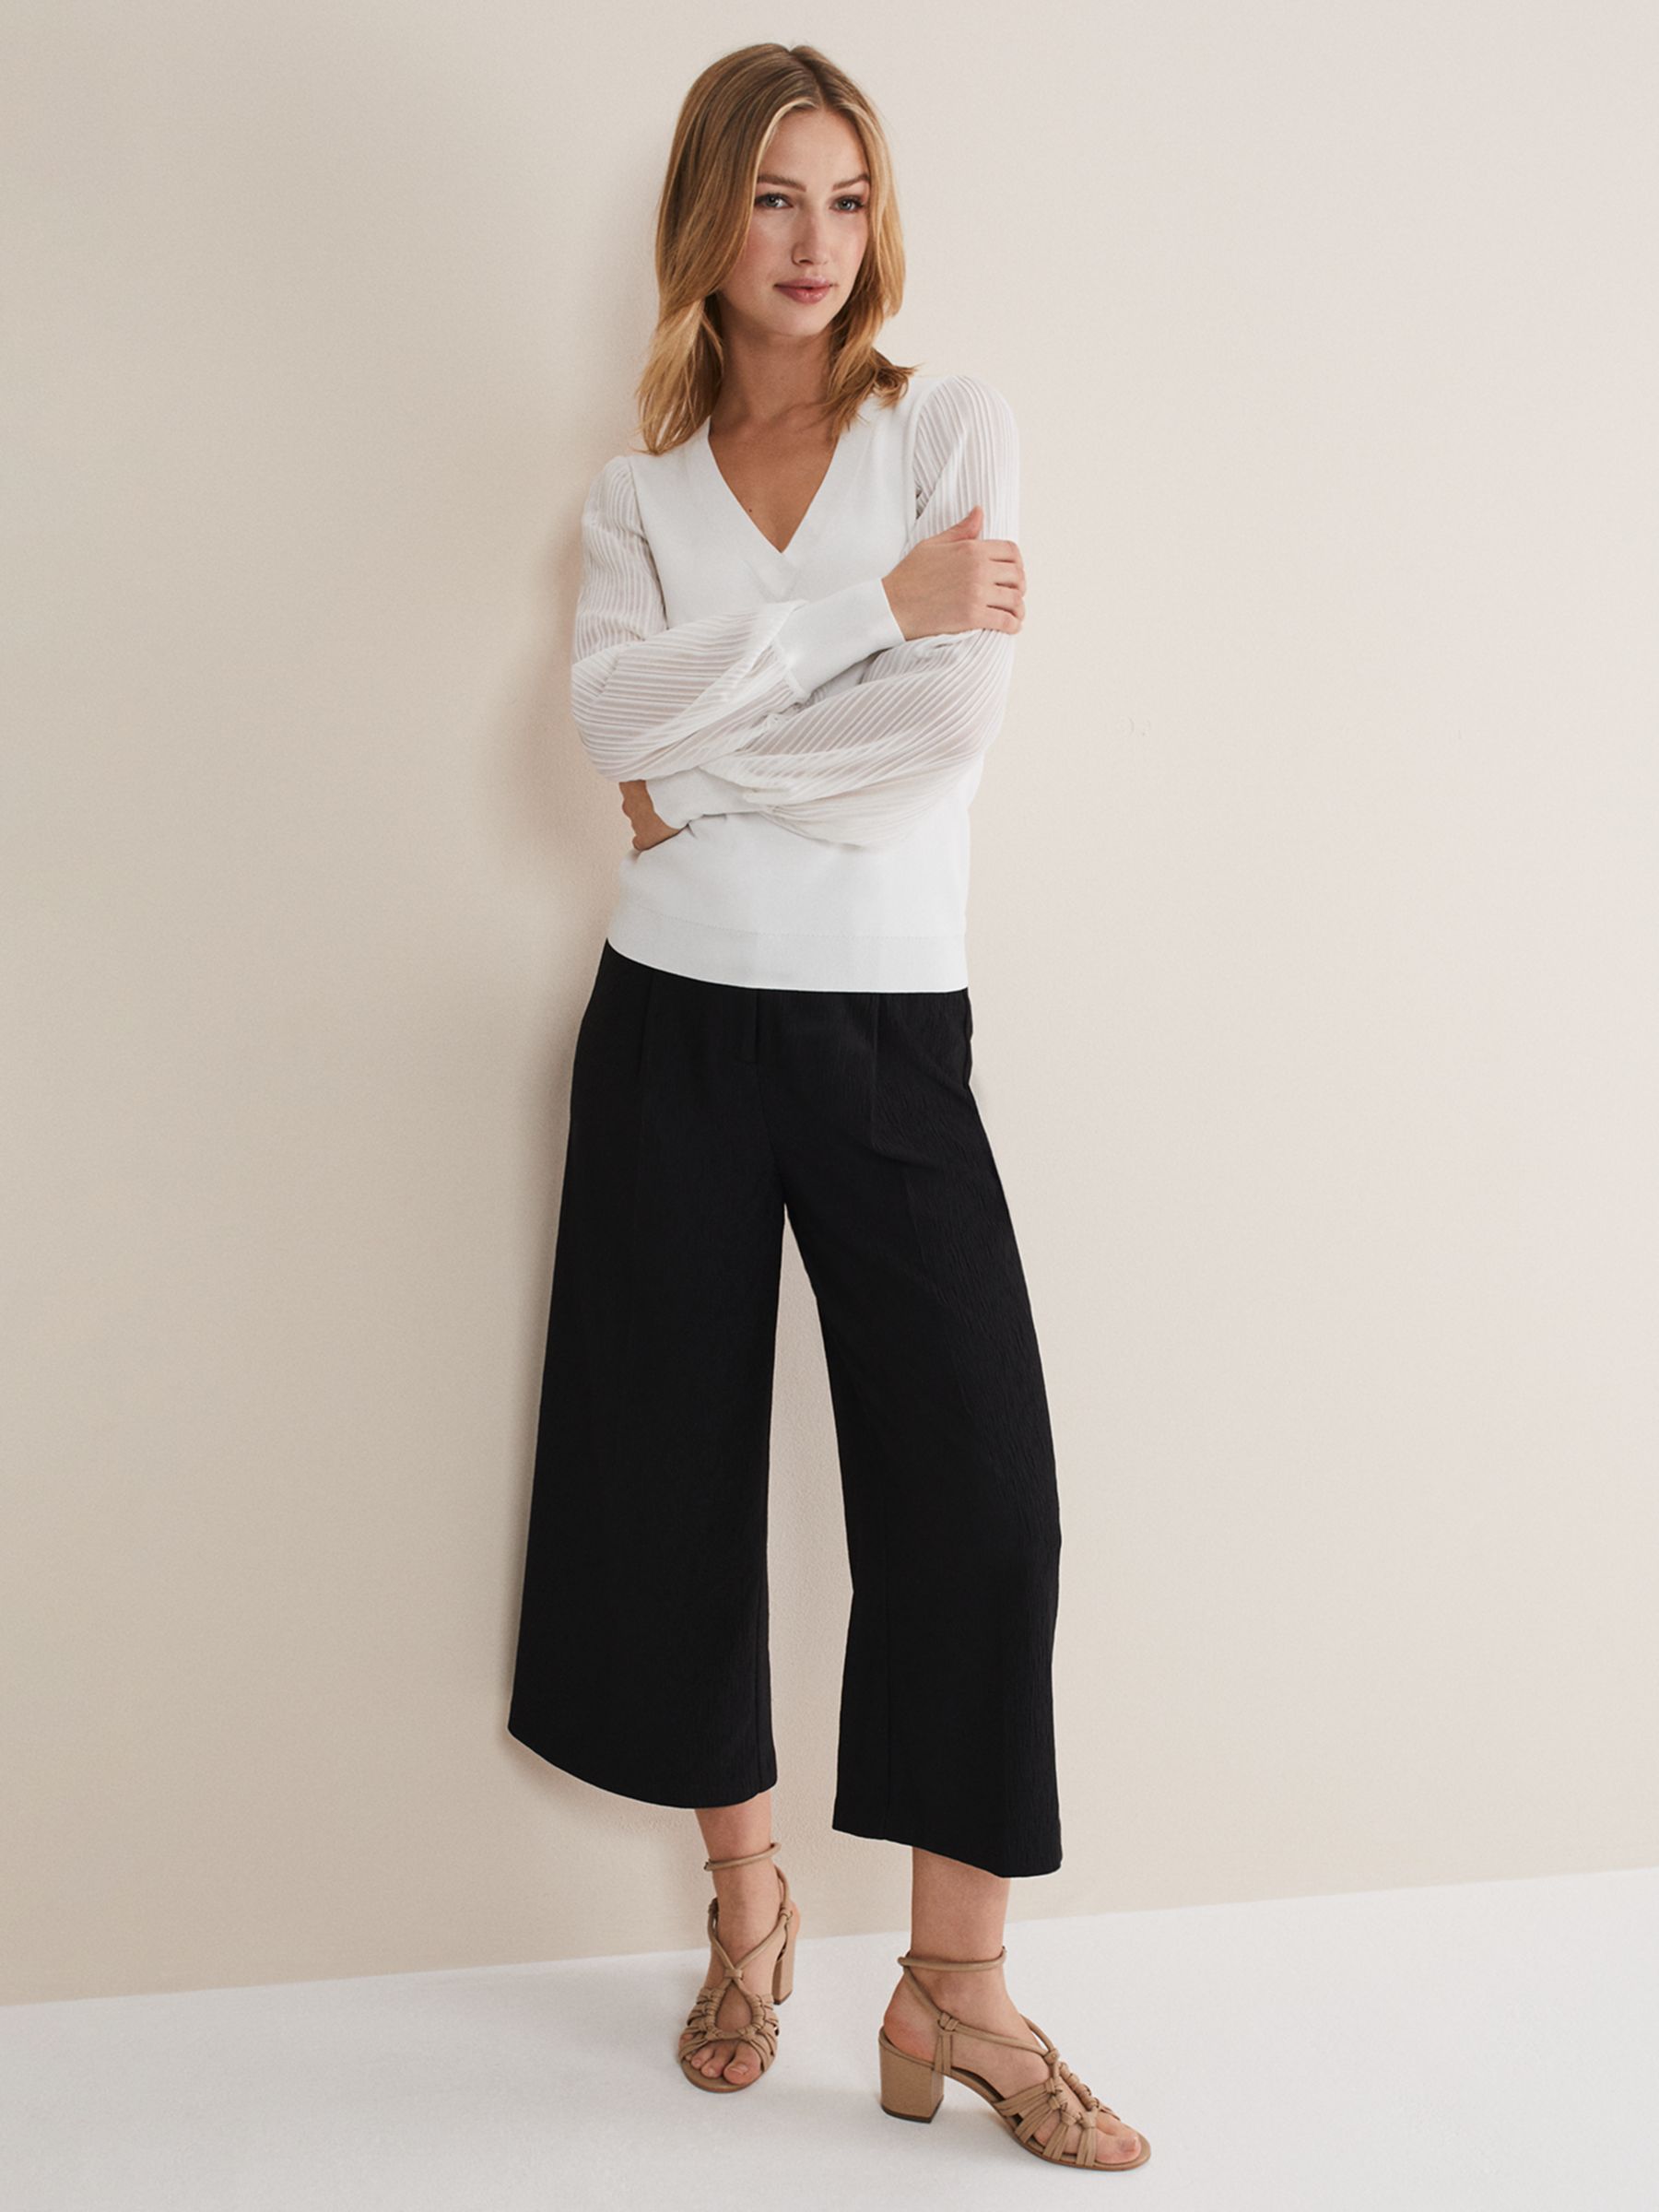 Silence + Noise Soft Pleated Culotte Pant in Black